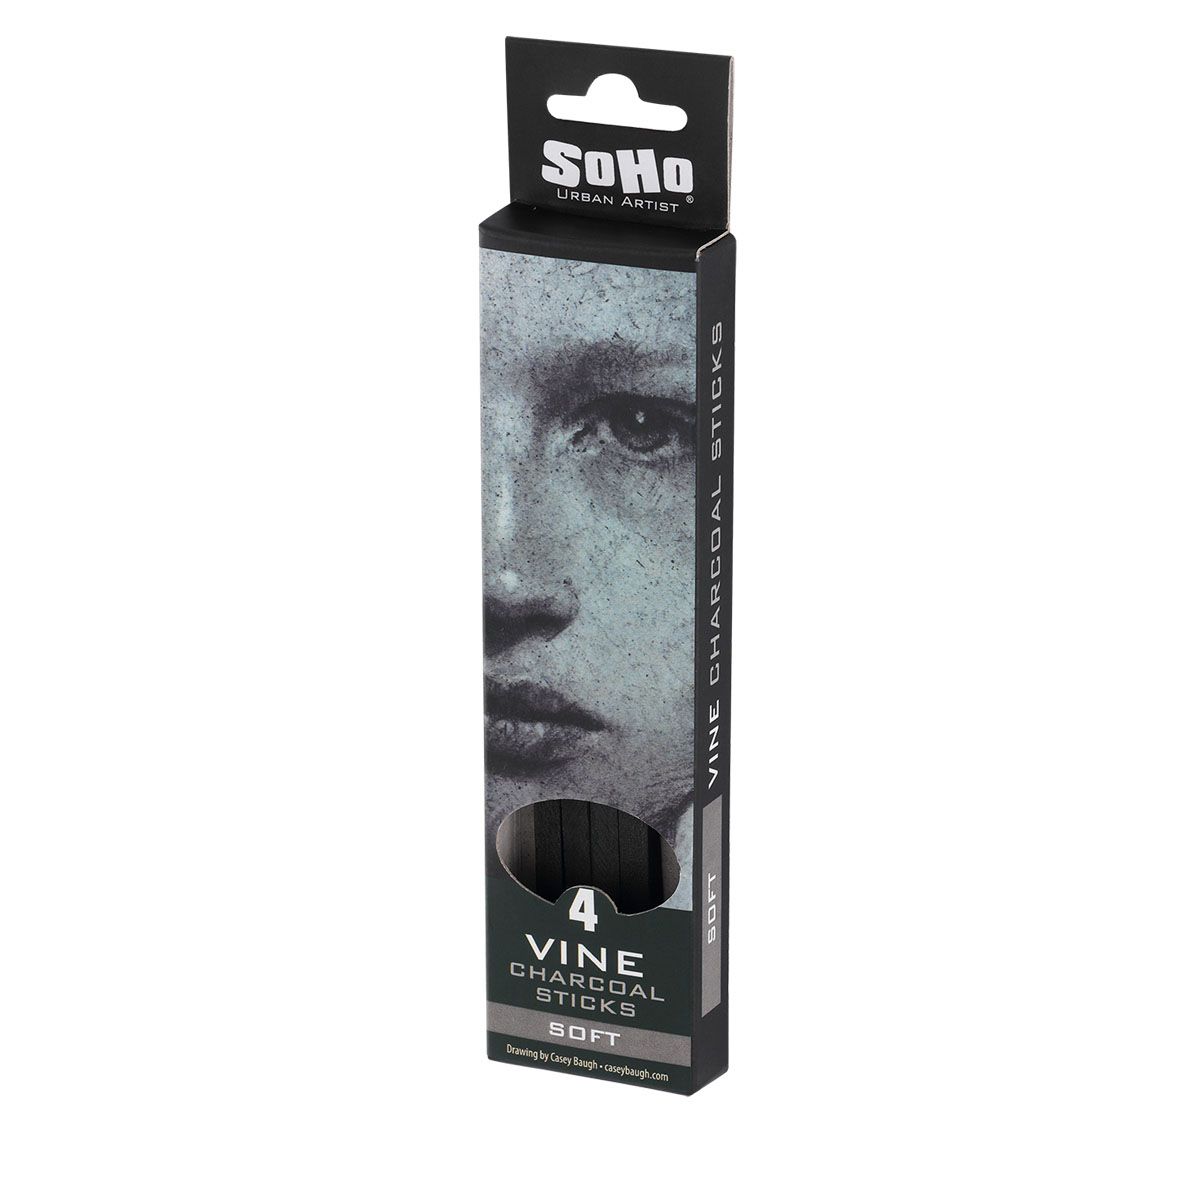 Artist Vine Charcoal Black 4 Charcoal Sticks for Drawing, Sketching, and  Fine Art